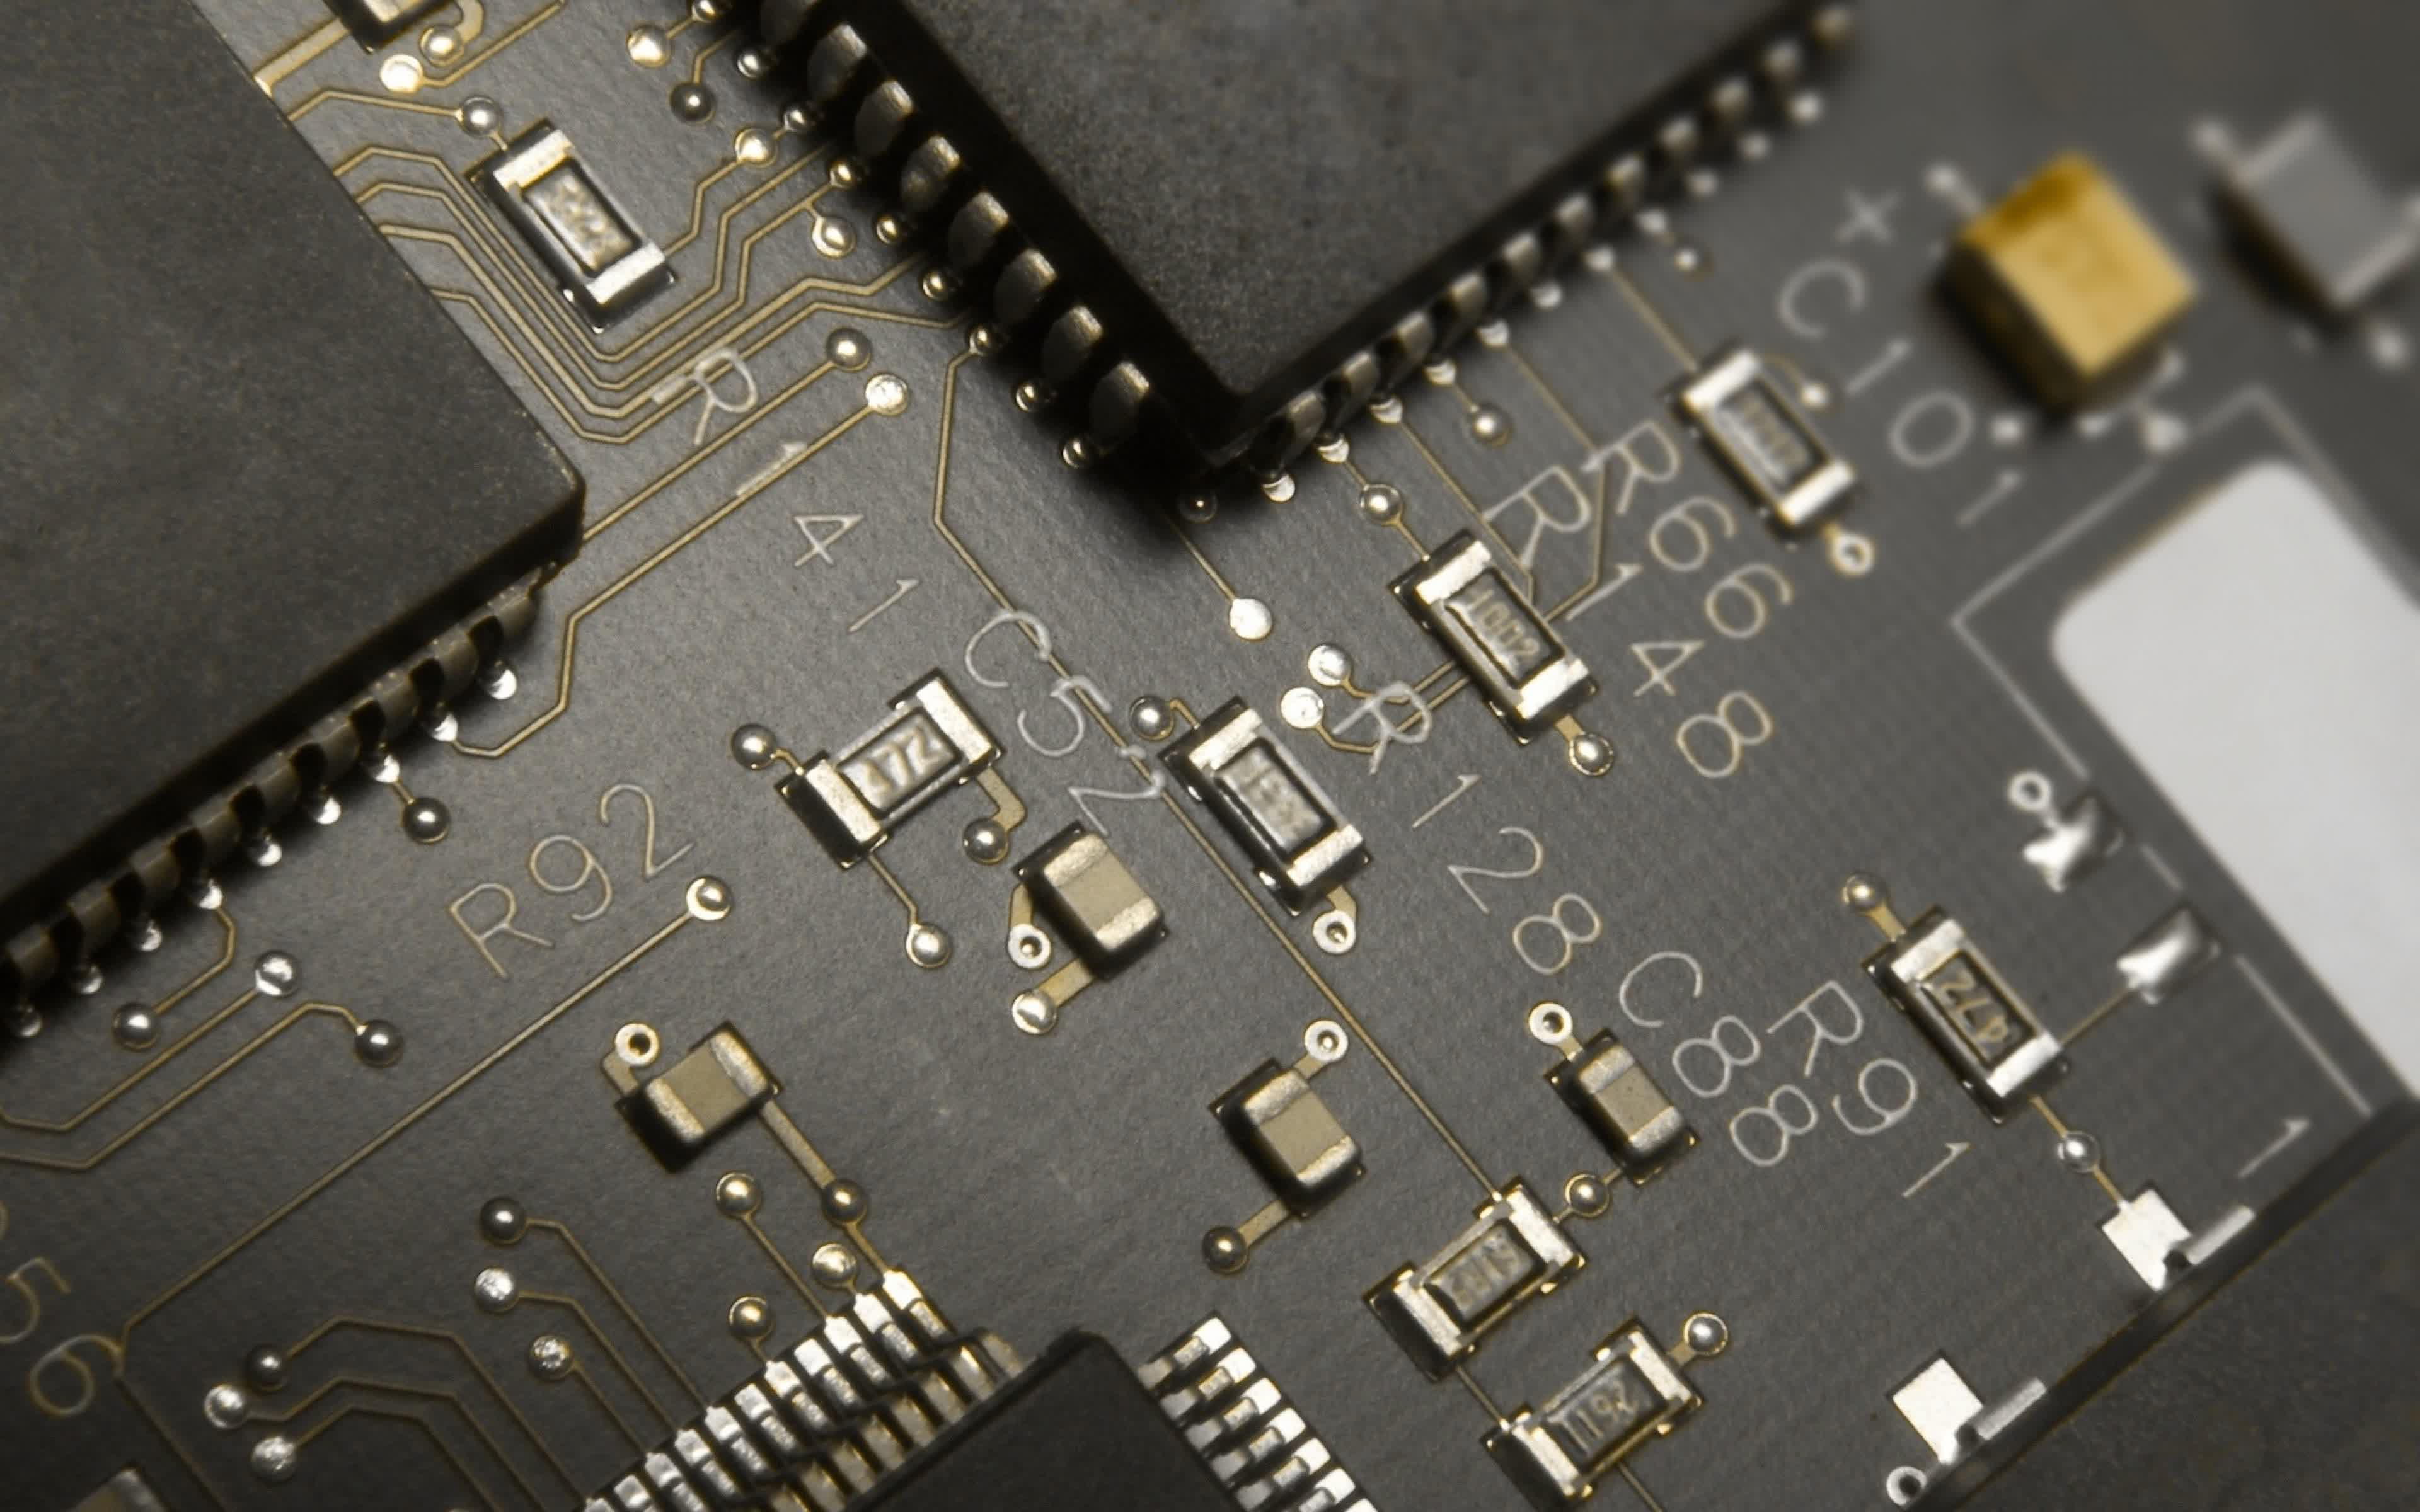 The tech industry is bracing for a potential shortage of passive electronic components